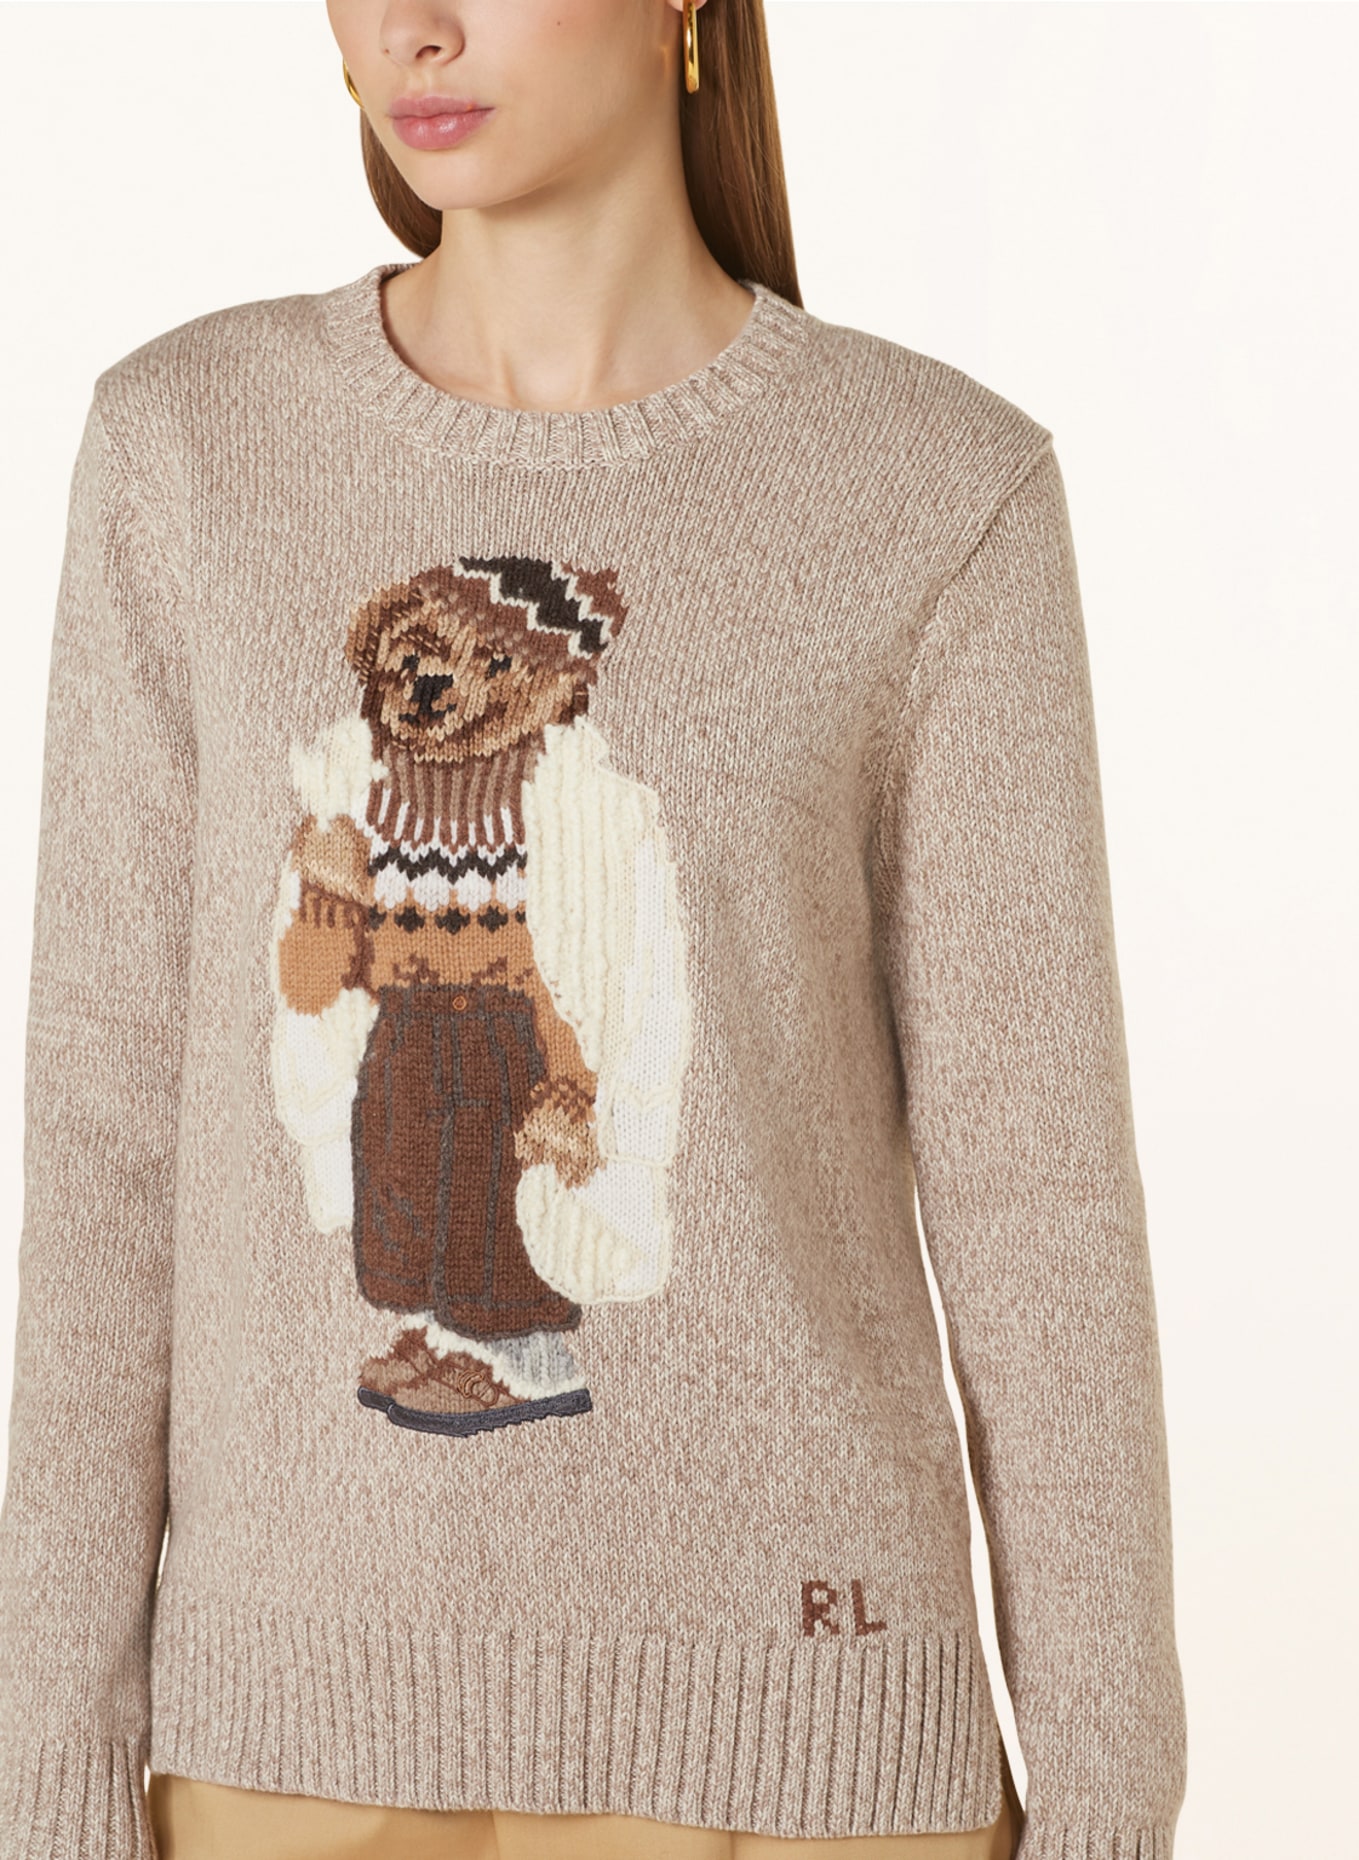 POLO RALPH LAUREN Sweater, Color: LIGHT BROWN/ BROWN/ WHITE (Image 4)